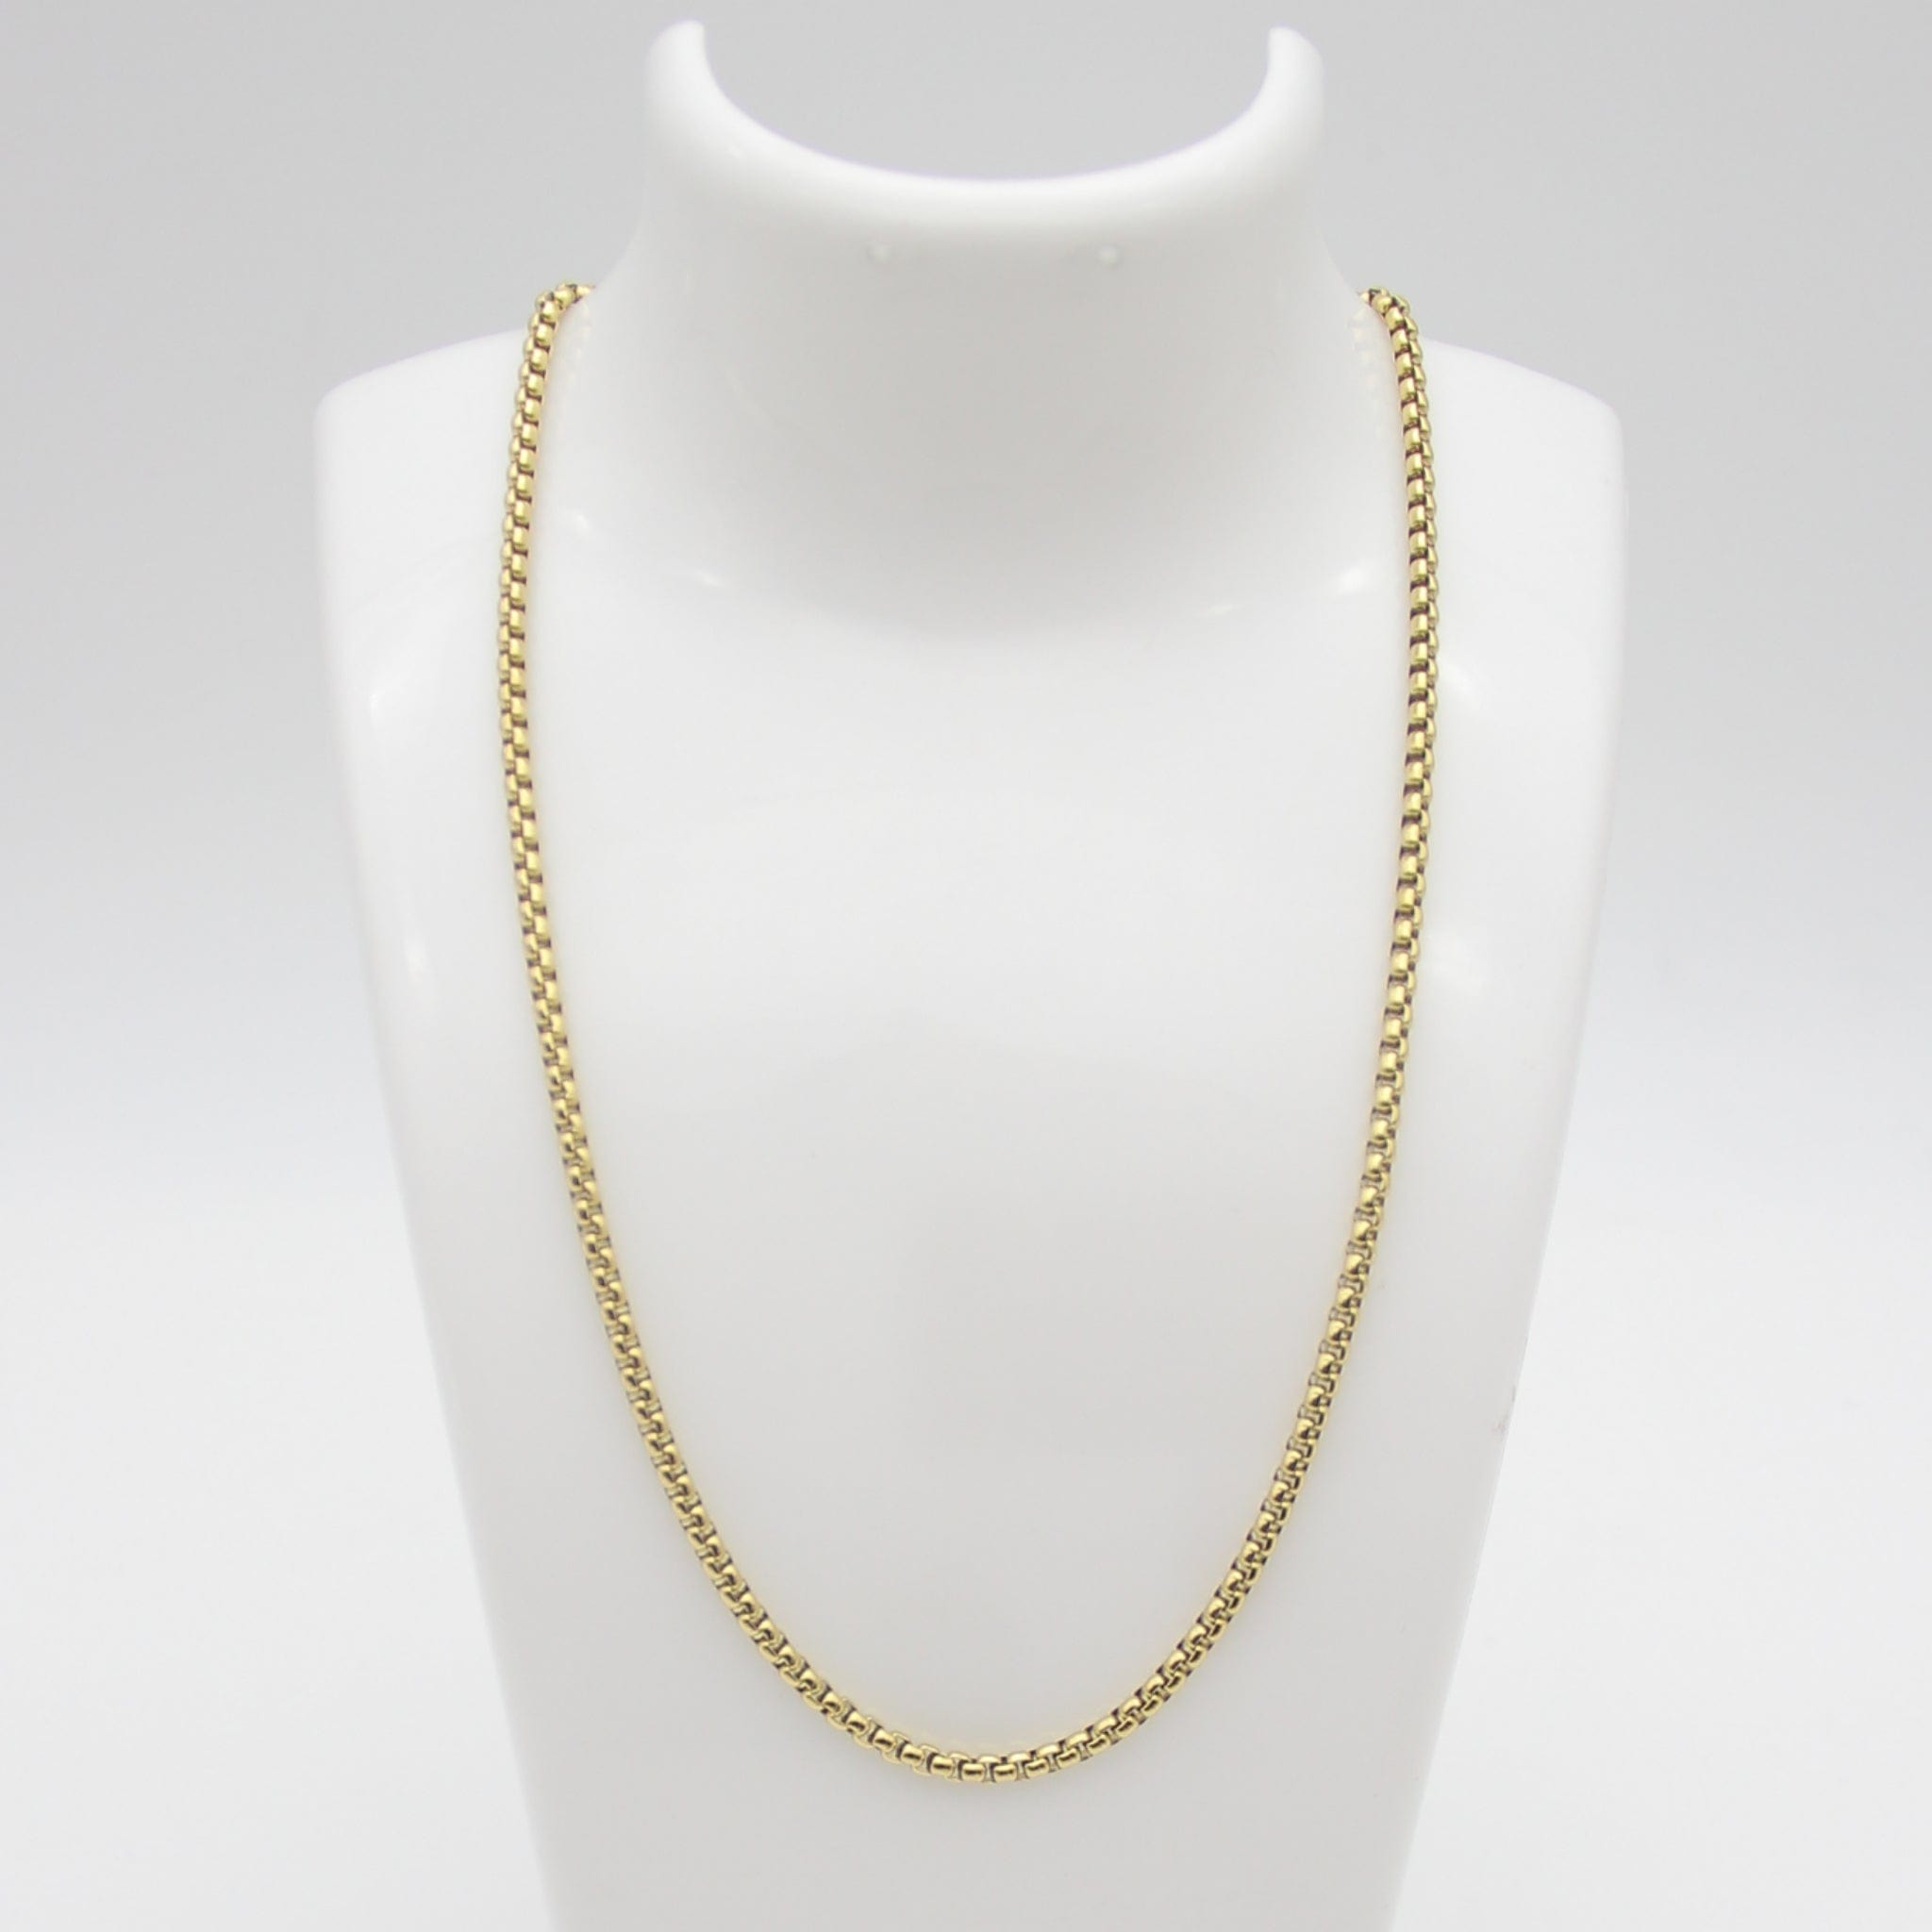 Outlet W&B Female Necklaces Basic Golden Stainless Steel Necklace